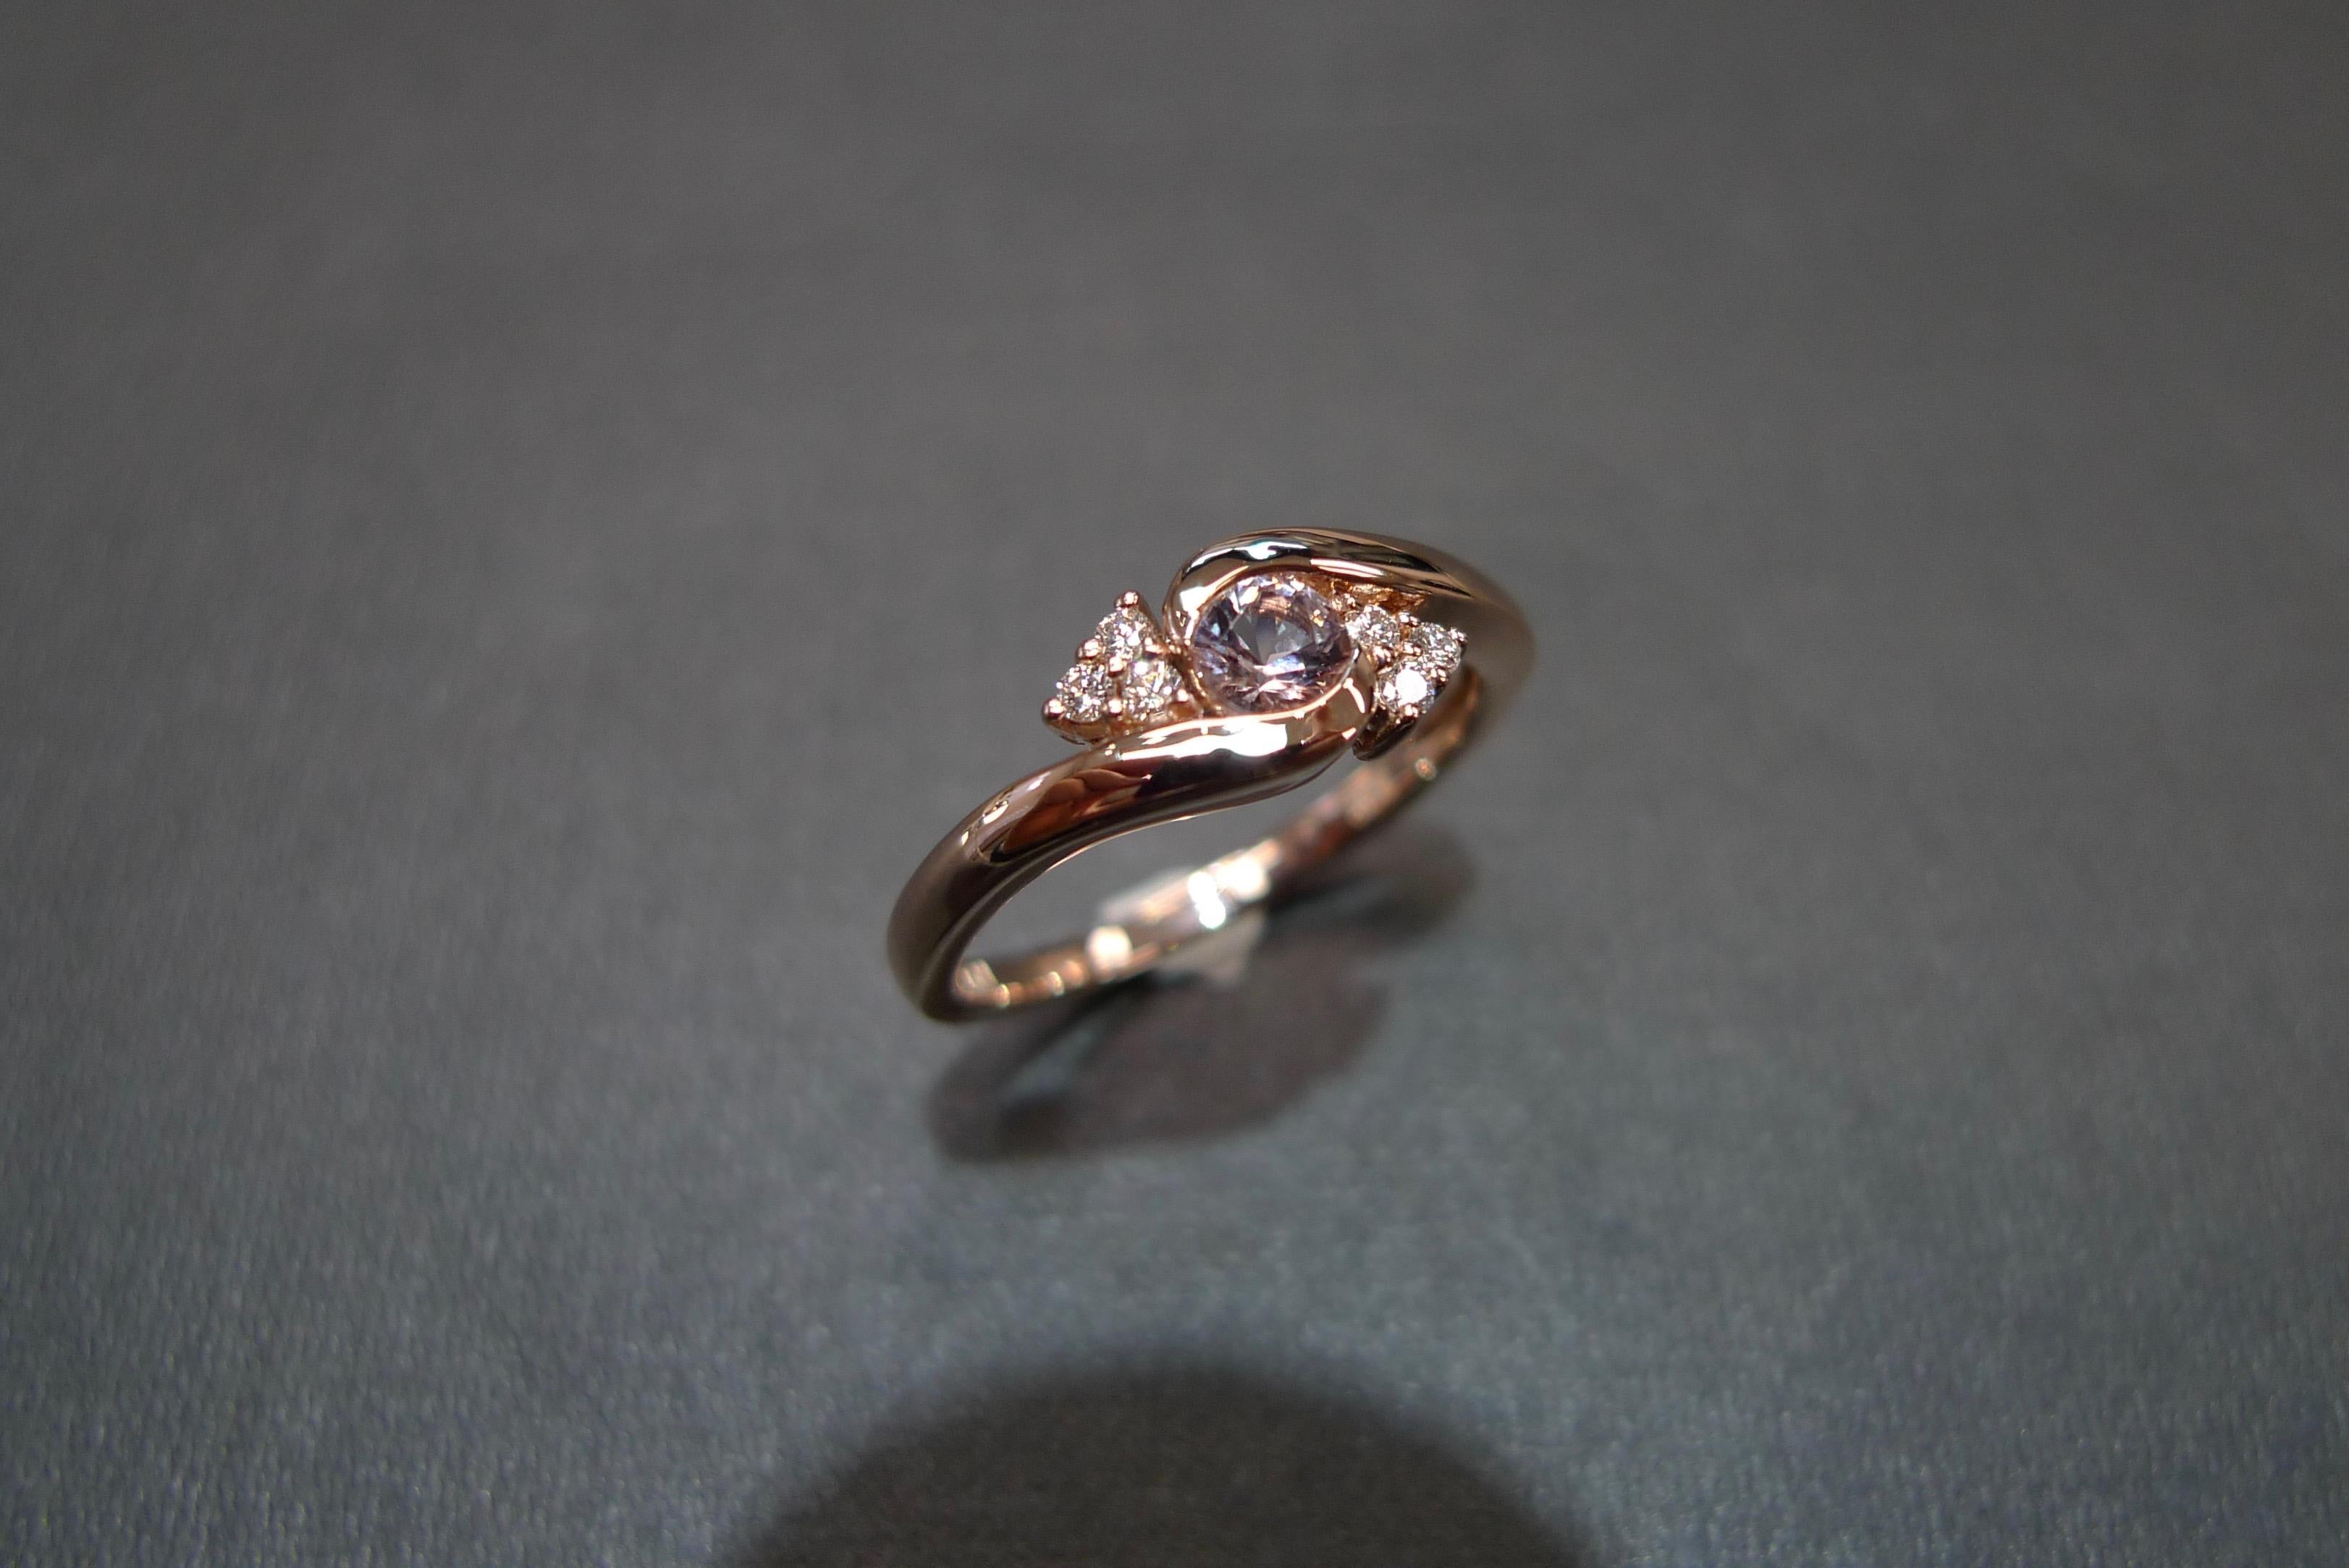 For Sale:  Morganite and Diamonds Twist Tension Ring in 14K Rose Gold 7